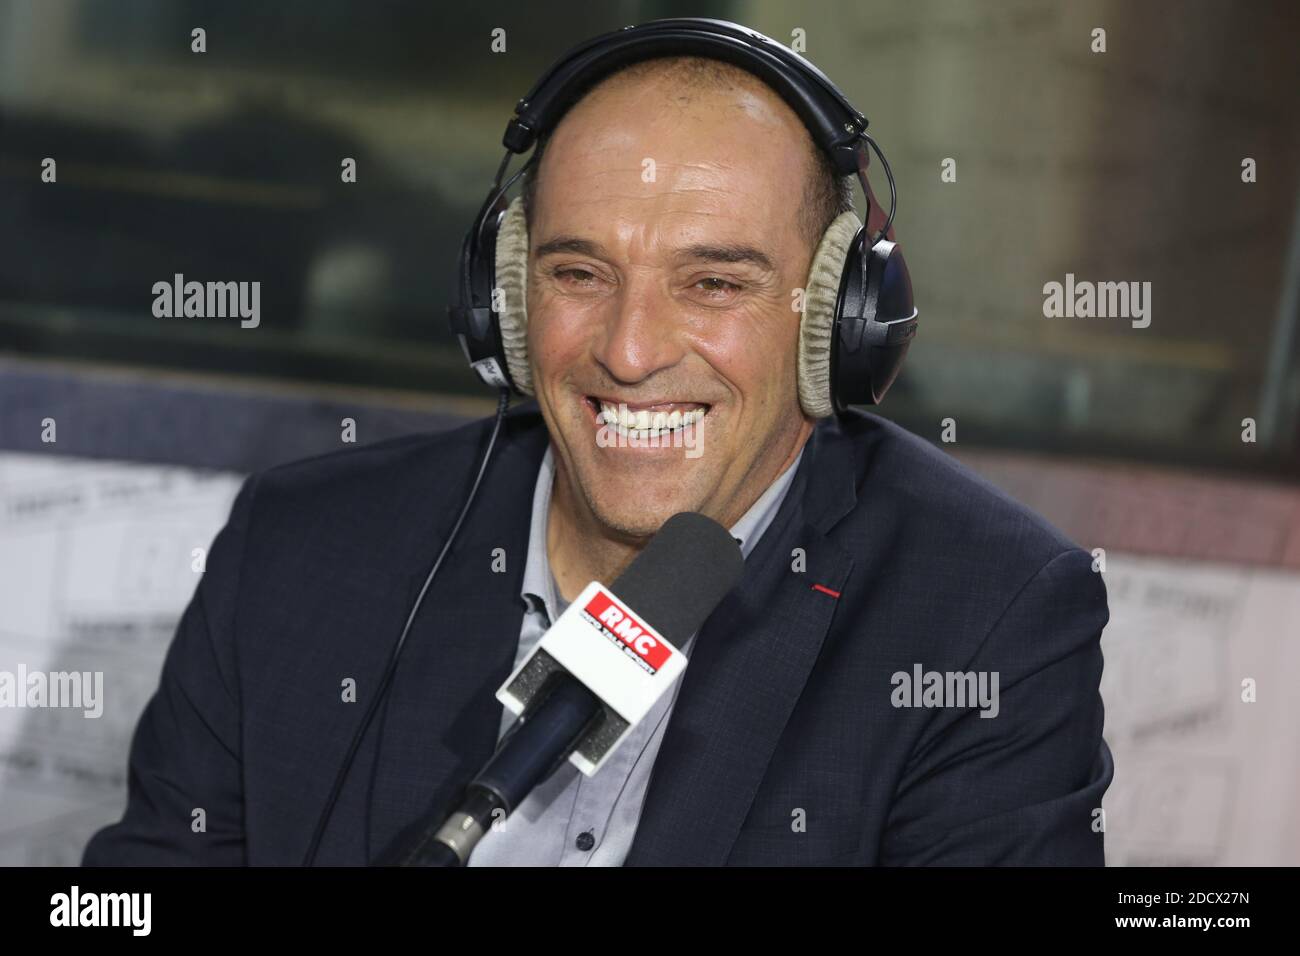 Exclusive - Jean-Luc Cretier at the 'Radio Brunet' sport talk show on RMC  Radio, interviewed by